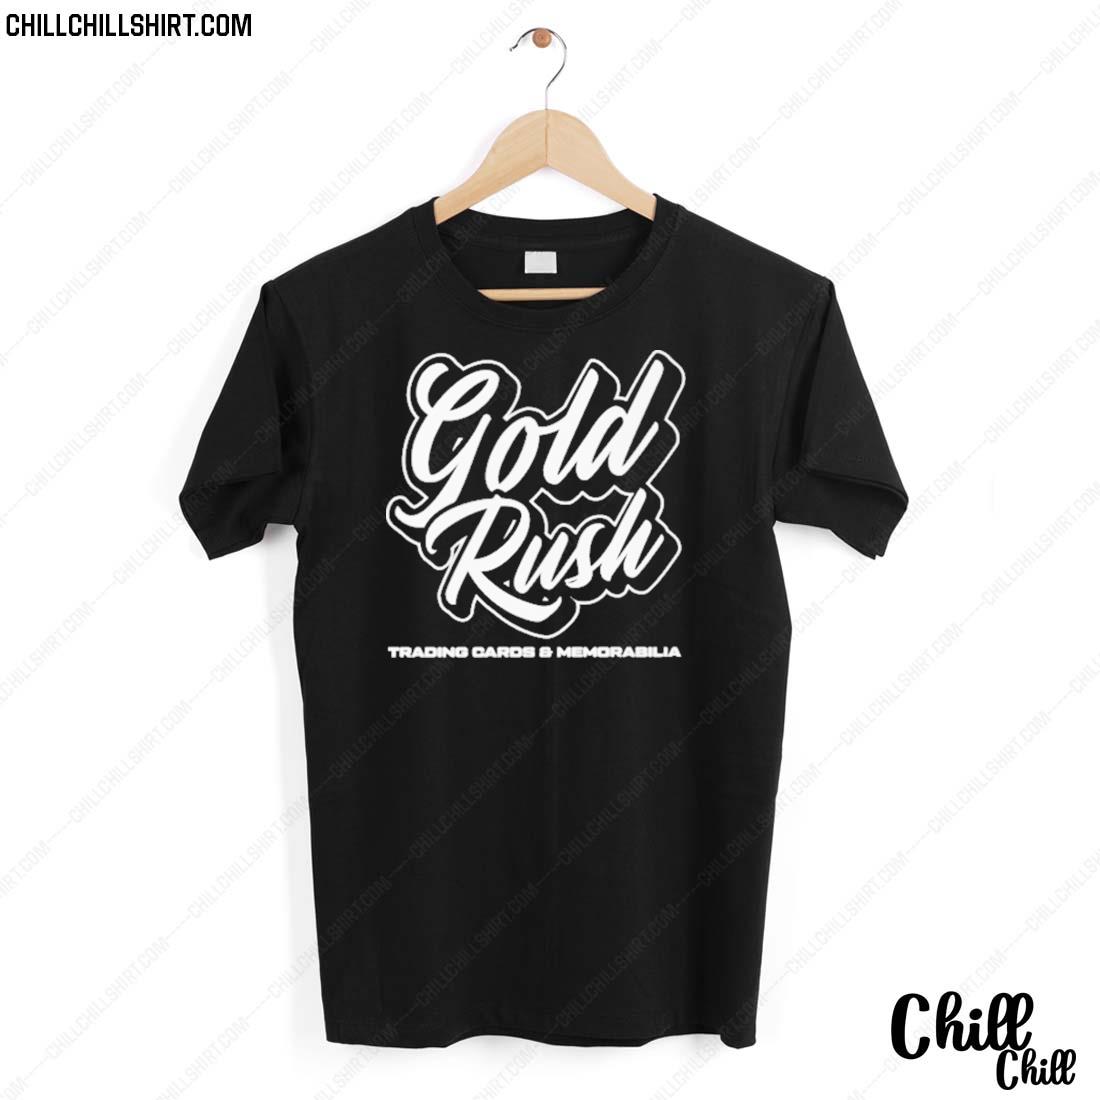 Nice gold Rush Trading Cards And Memorabilia T-shirt